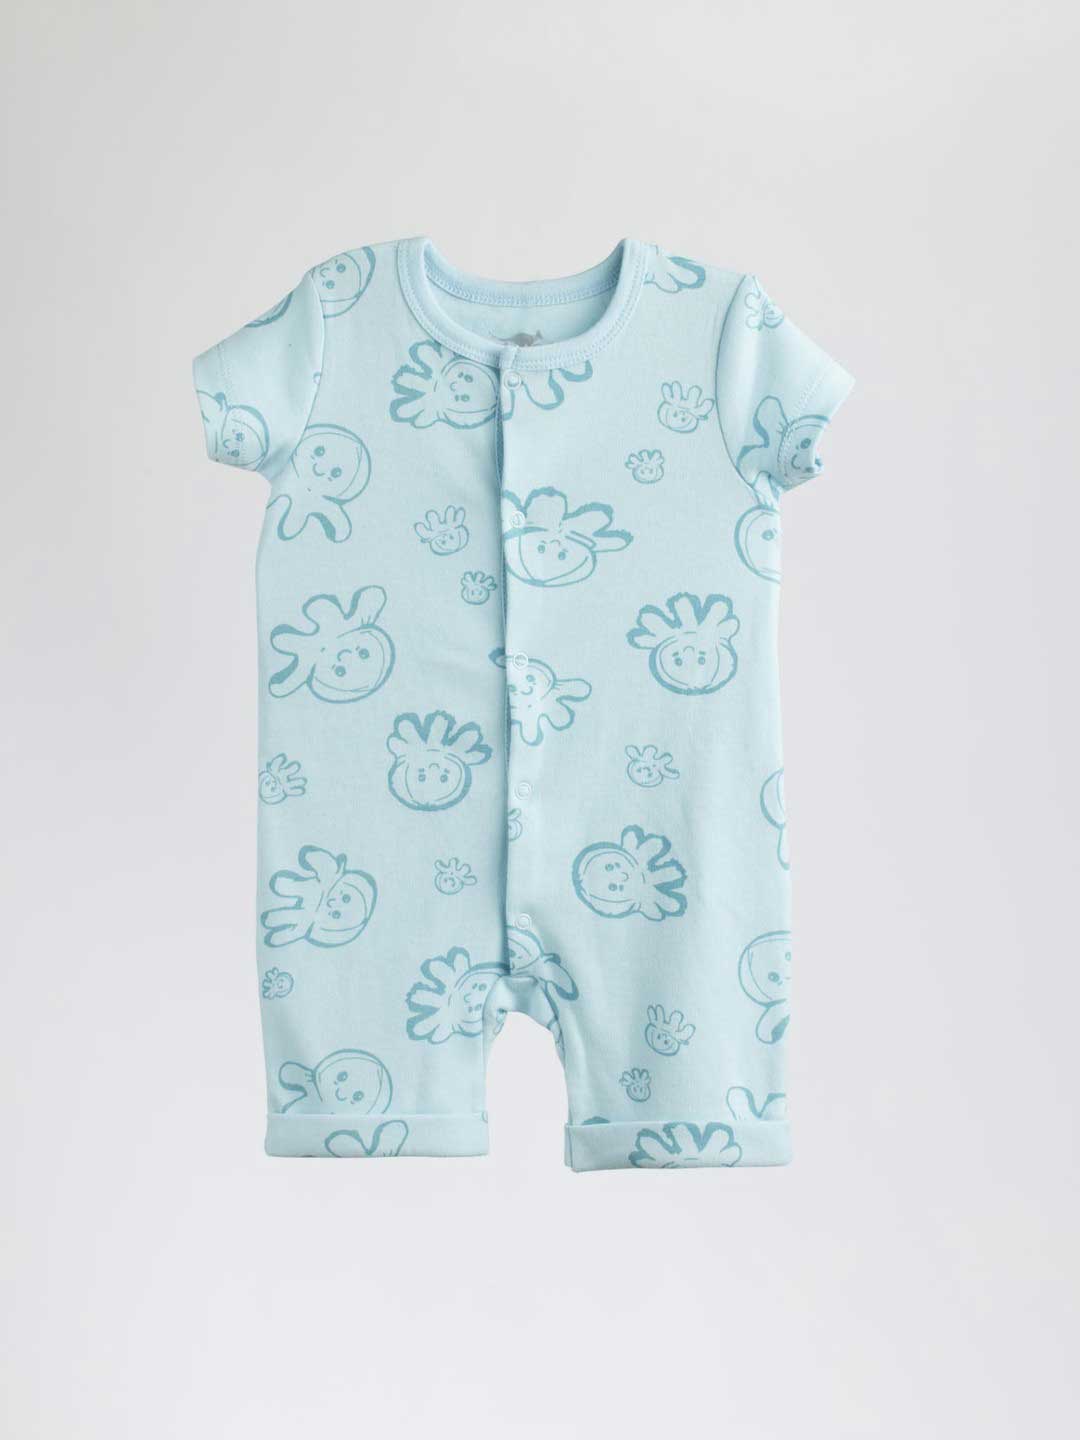 The infant overall short with sea friends print is a piece of clothing perfectly suitable for both, a lazy lie-down in the warmth of the sand and for a naughty bustle in the feet-tickling grass.